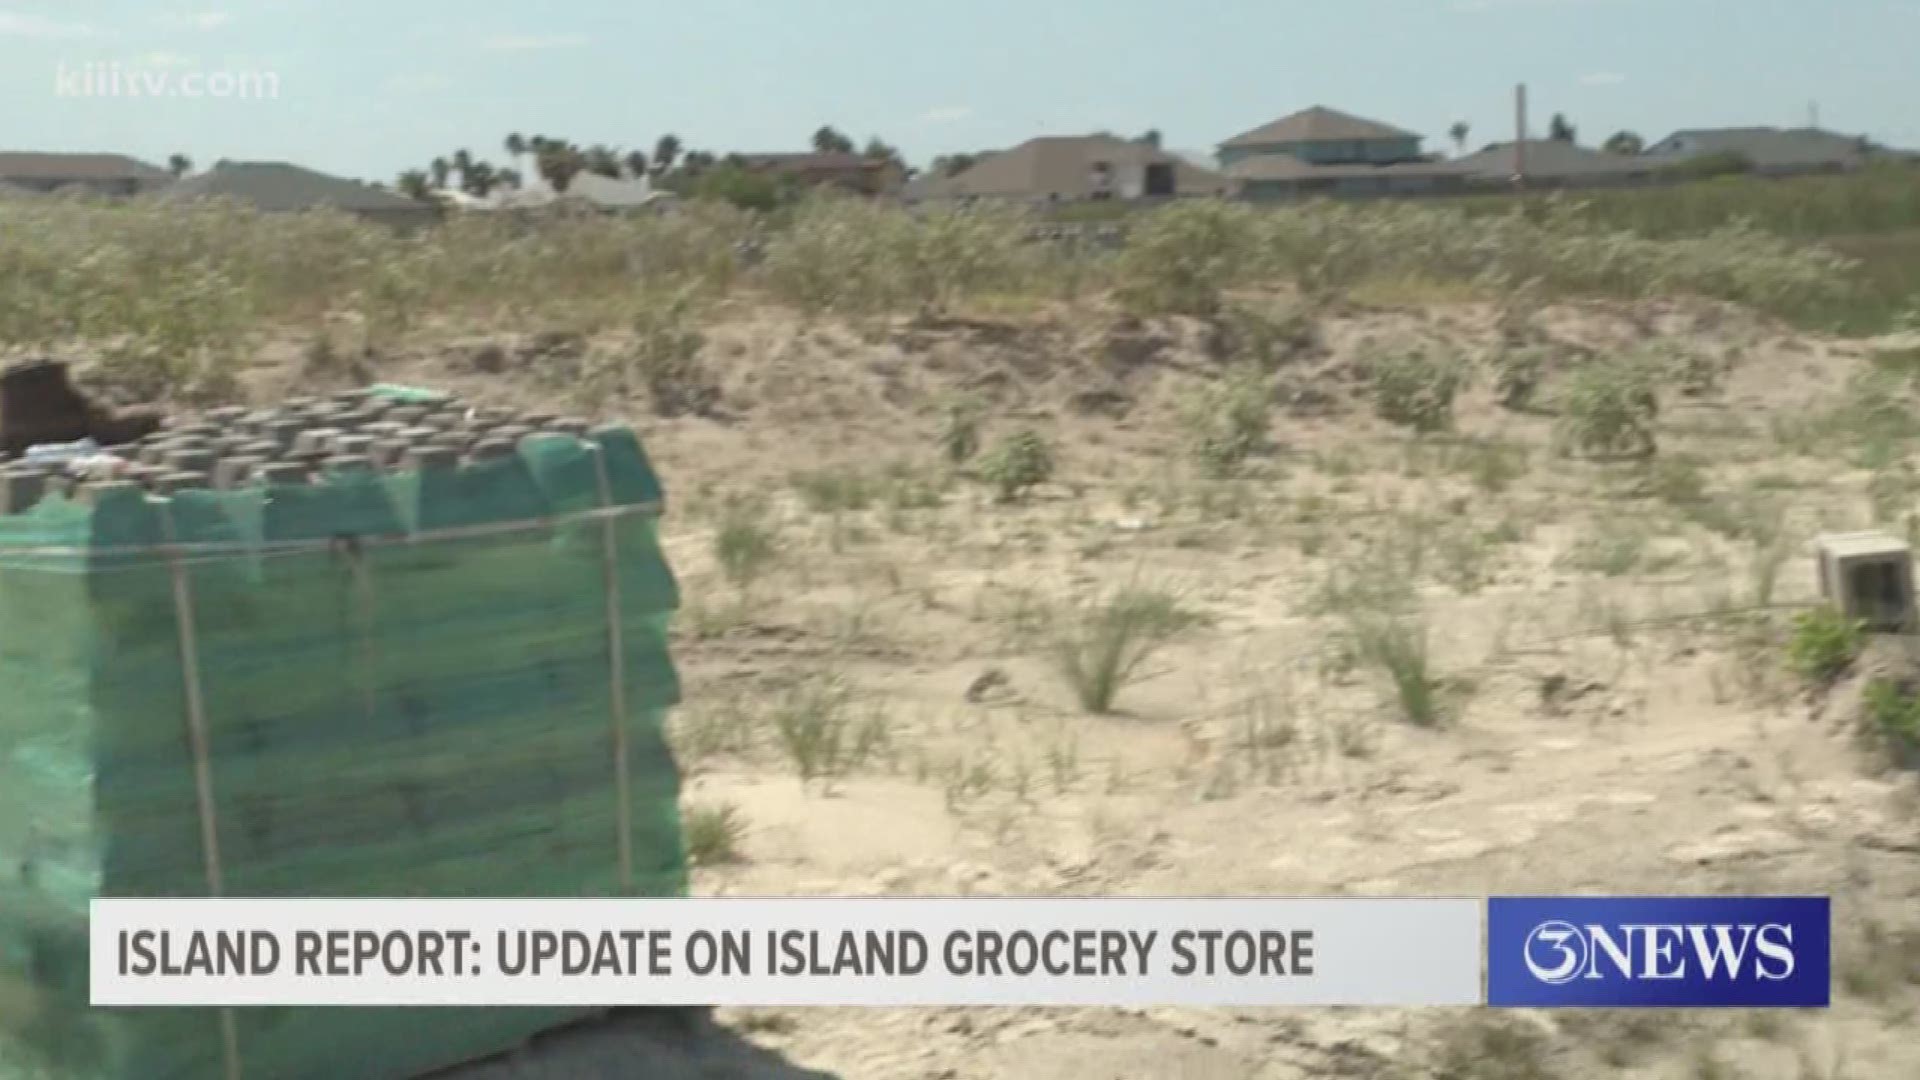 One thing that residents of Padre Island have wanted for decades is a grocery store.